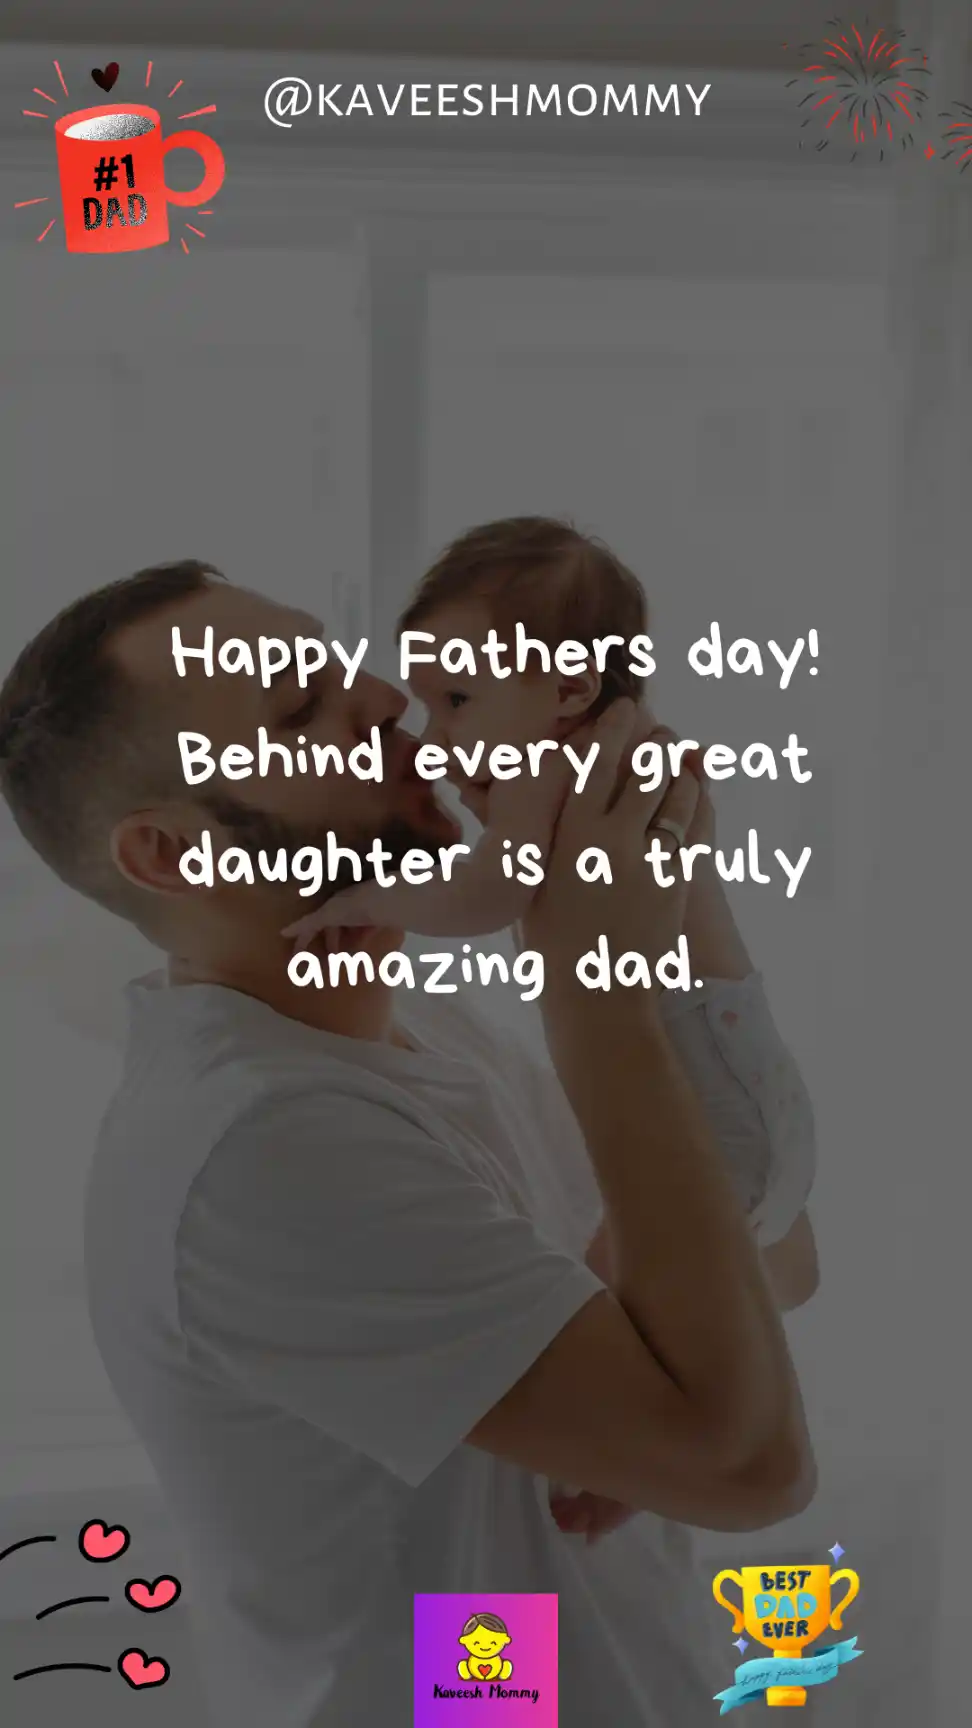 best daddy daughter quotes-Happy Fathers day! Behind every great daughter is a truly amazing dad.